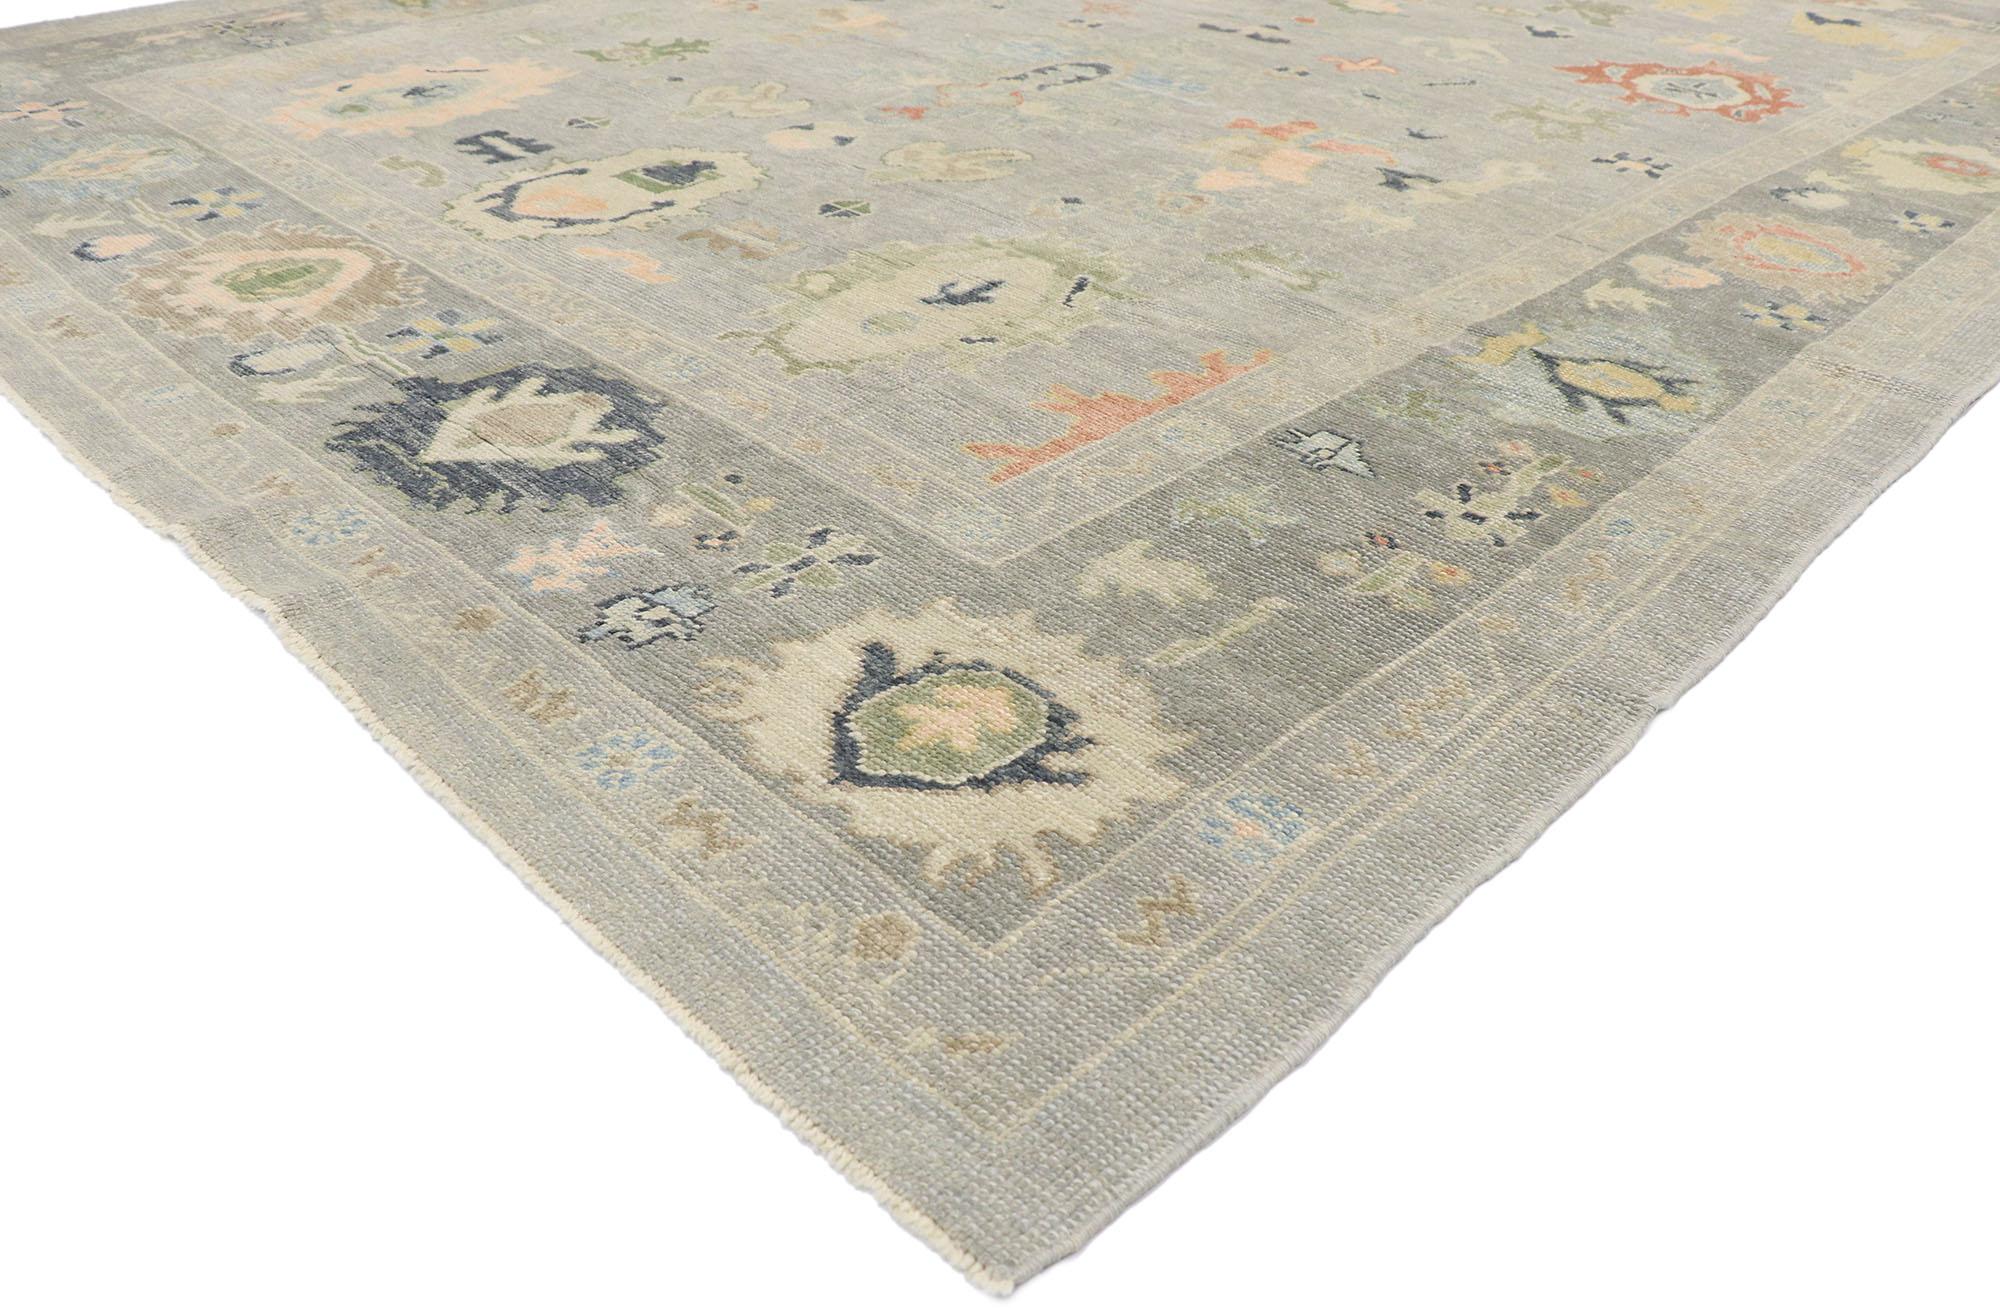 53500, new contemporary gray Turkish Oushak rug with Modern Coastal Cottage style. Polished and playful with soft colors, this hand-knotted wool contemporary Turkish Oushak rug features an all-over botanical pattern spread across an abrashed gray